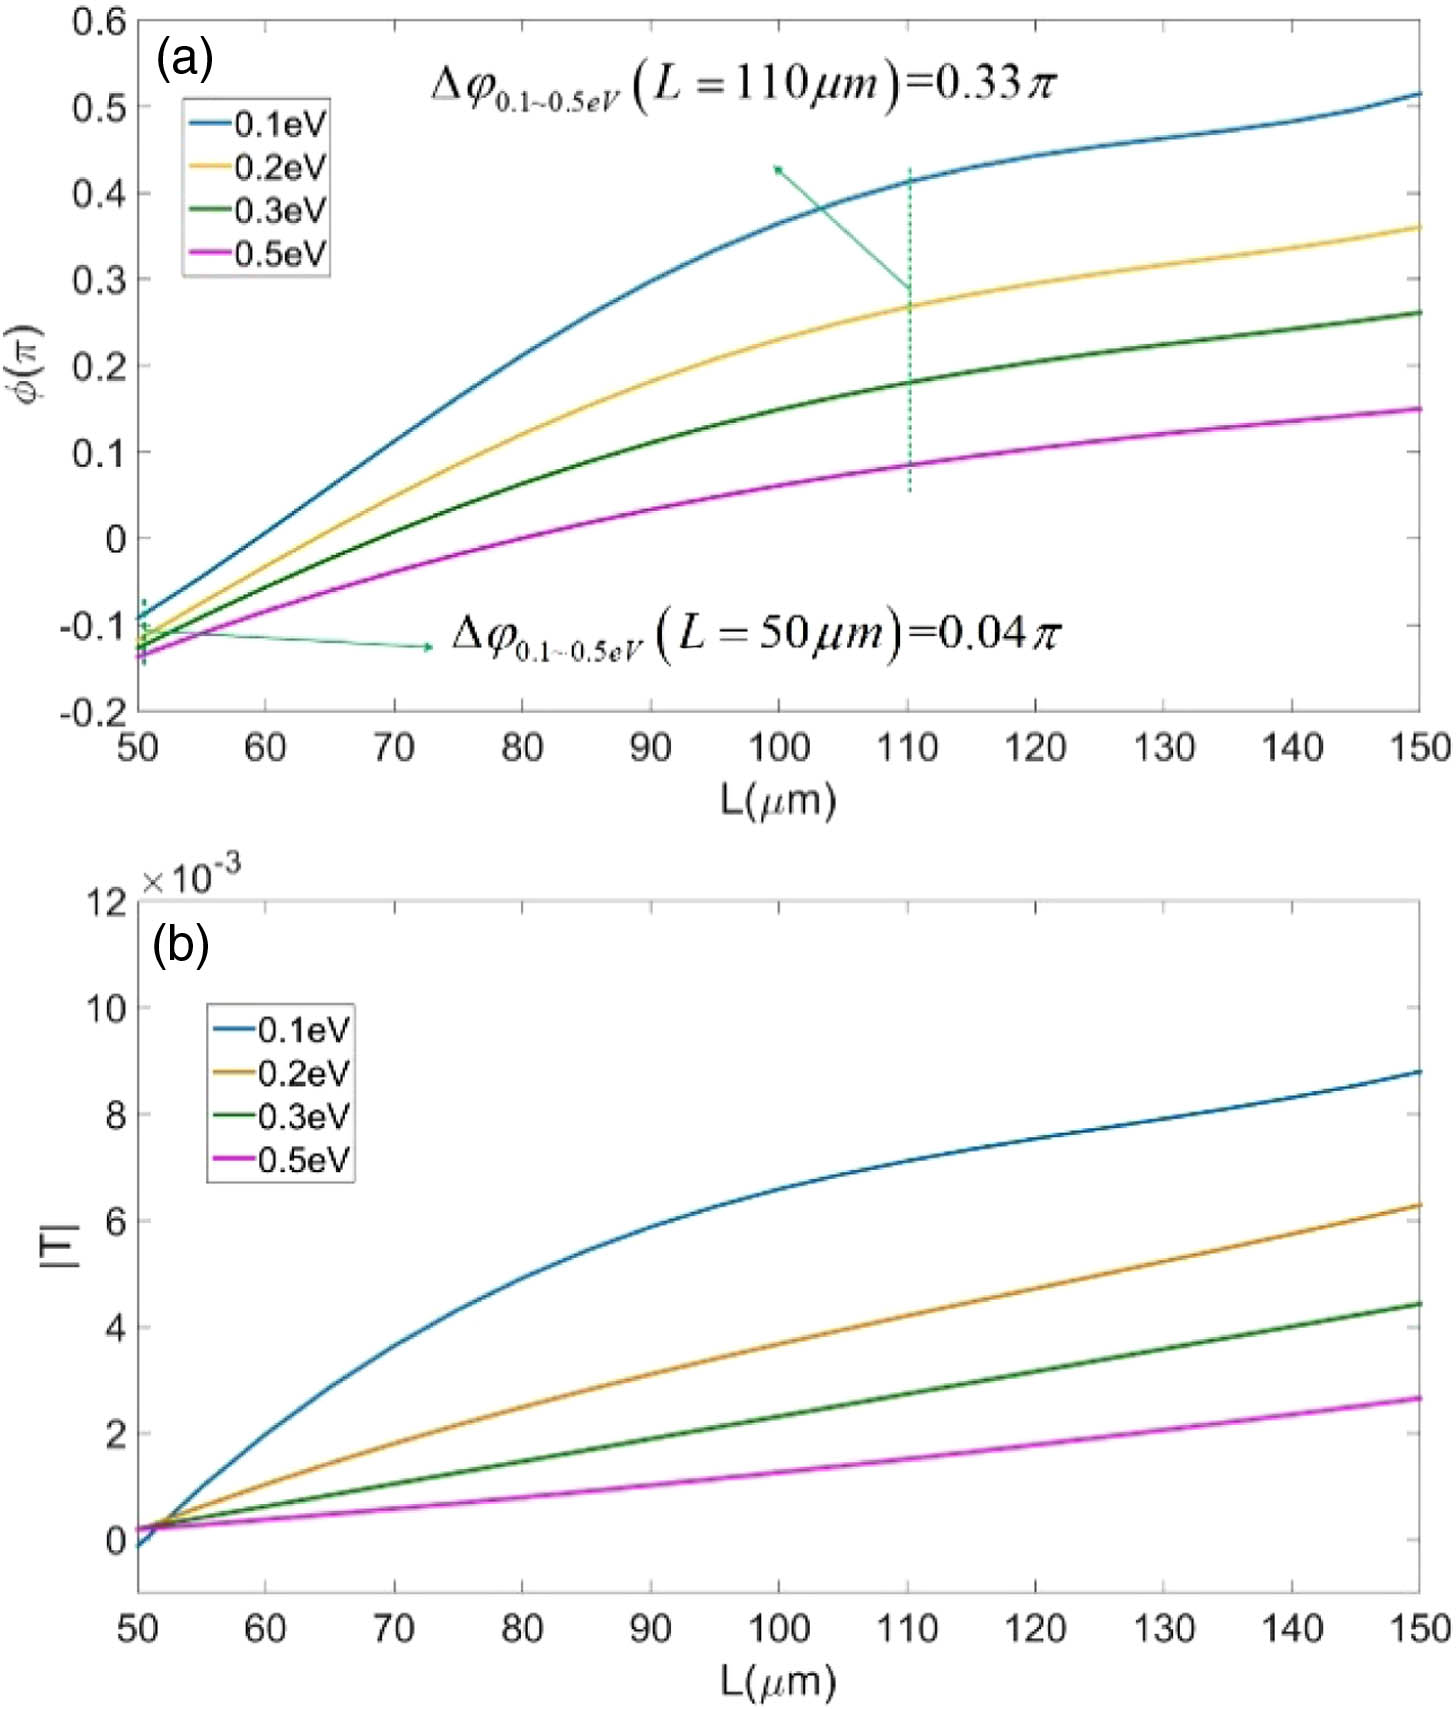 Dependence of transmitted RCP THz wave on the aperture length and graphene chemical potential. The aperture width is fixed as 20 μm. (a) Phase change of RCP THz wave as a function of L, when EF changes from 0.1 to 0.5 eV. (b) Transmission of RCP THz wave as a function of L, when EF changes from 0.1 to 0.5 eV.